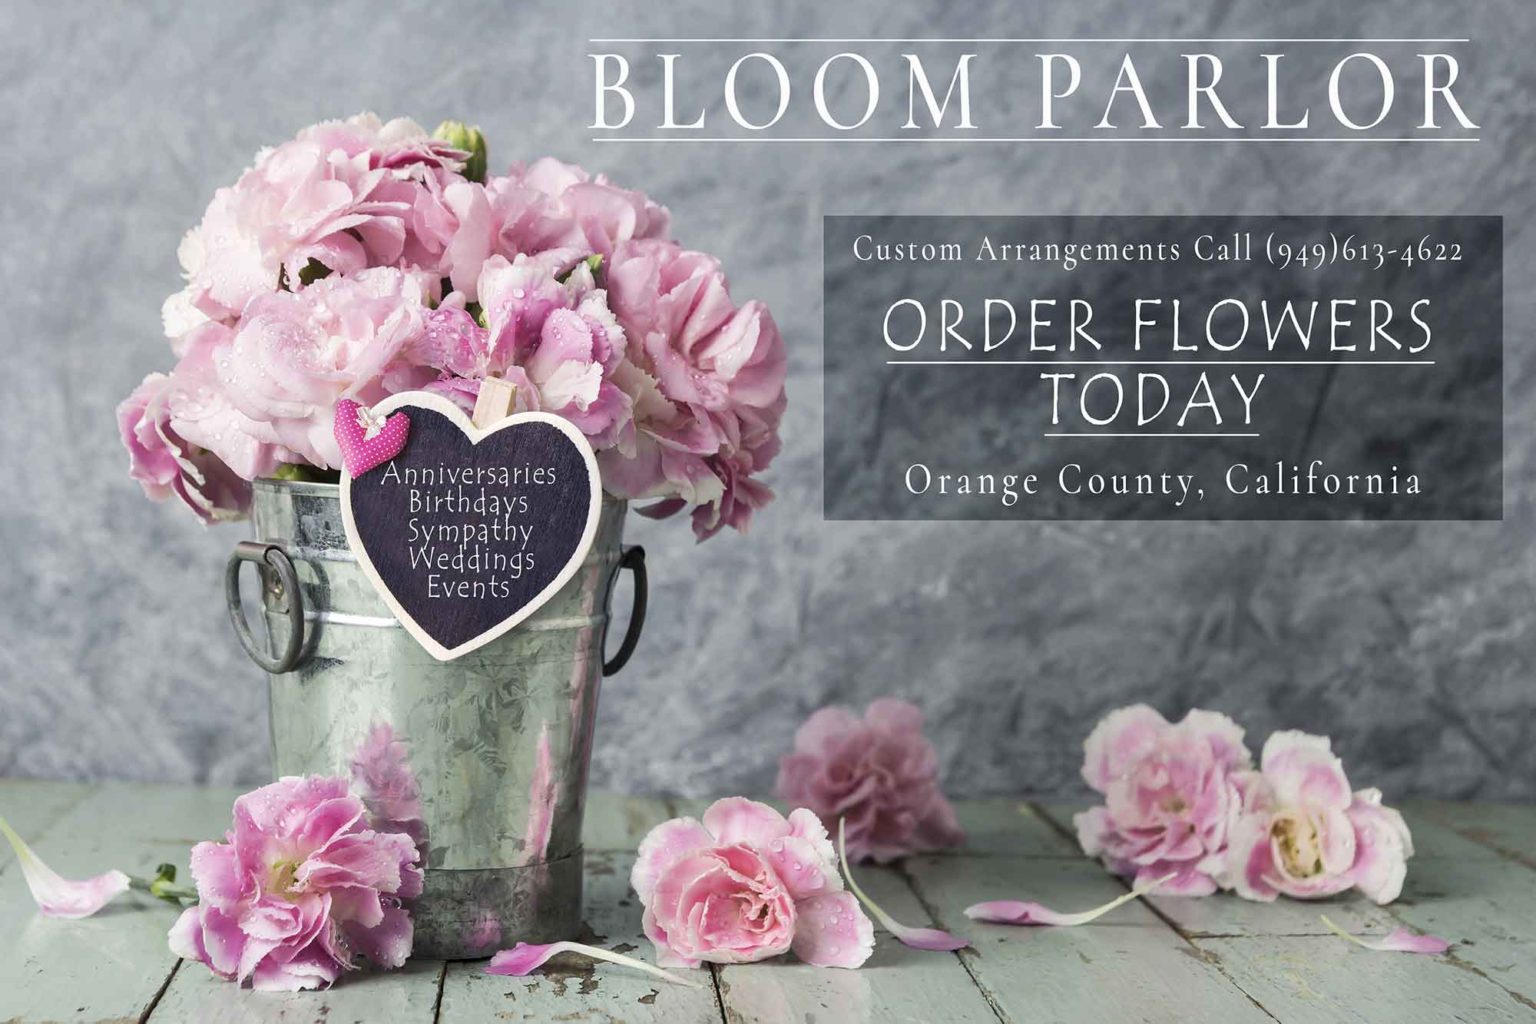 Mission Viejo Florist and Flower Delivery Banner